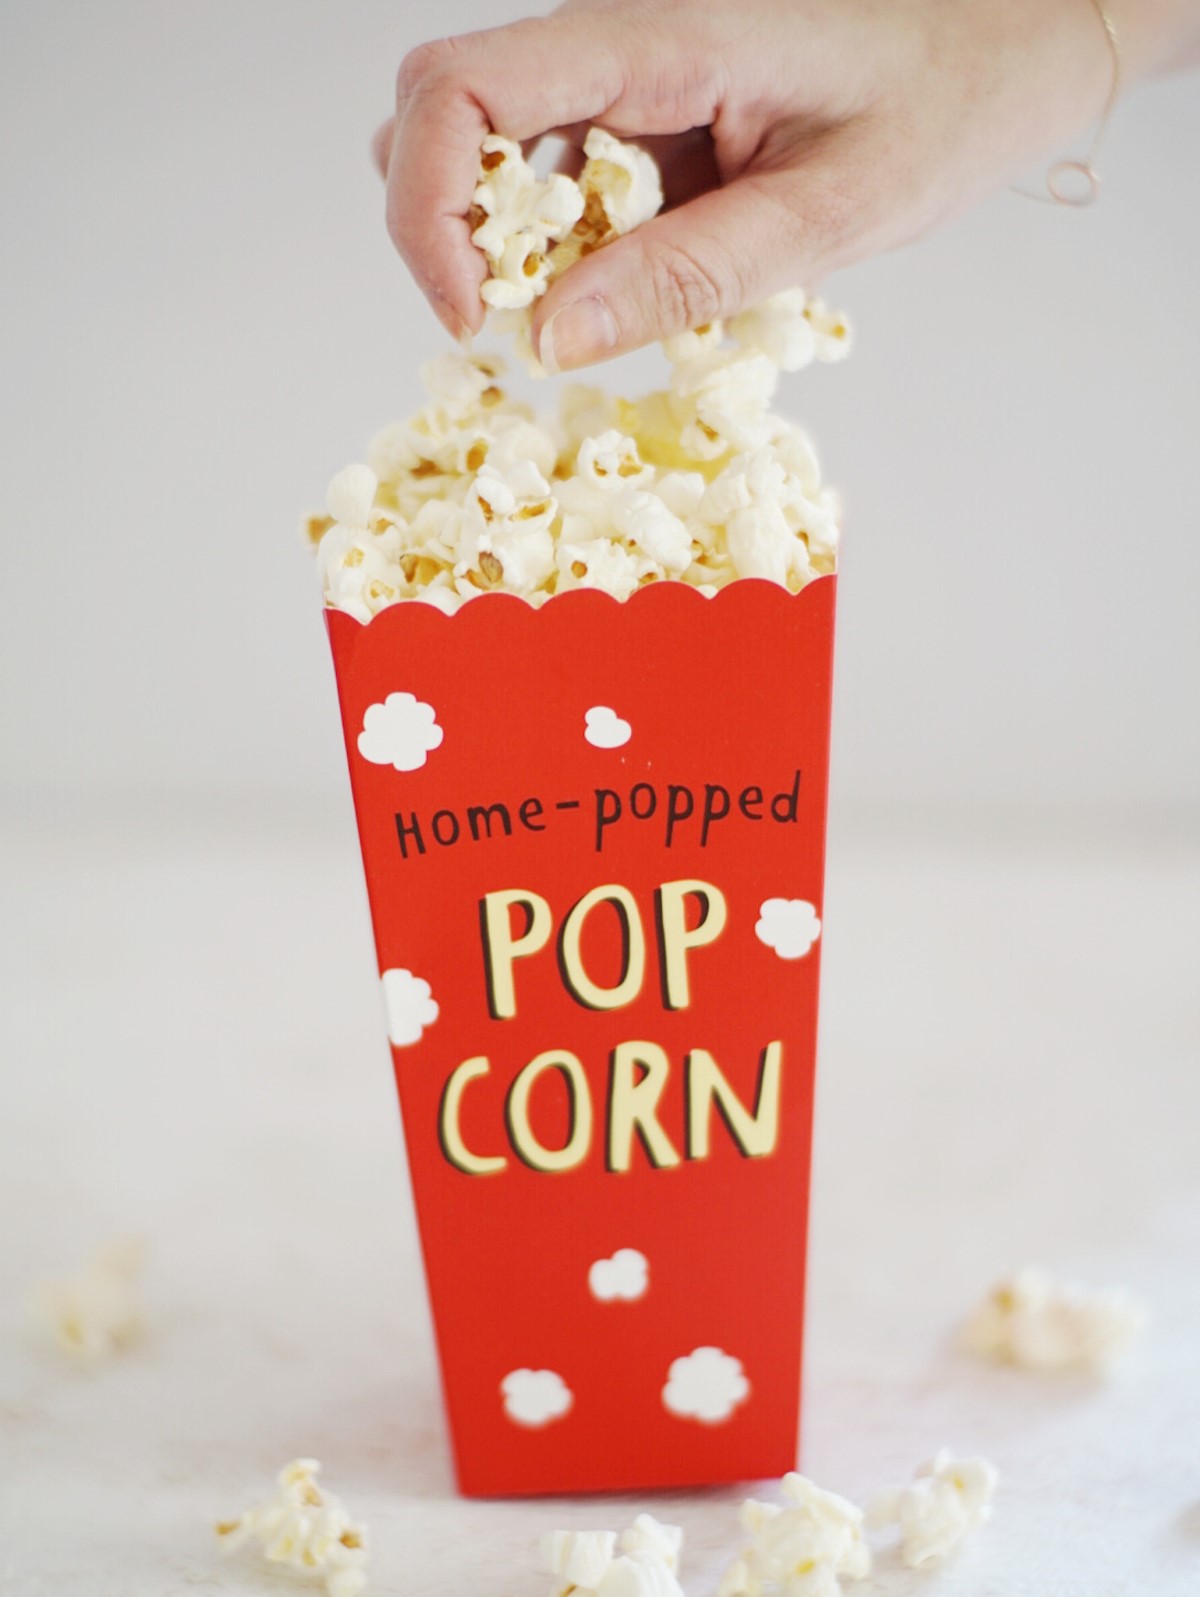 Homemade Popcorn - Title of the Recipe